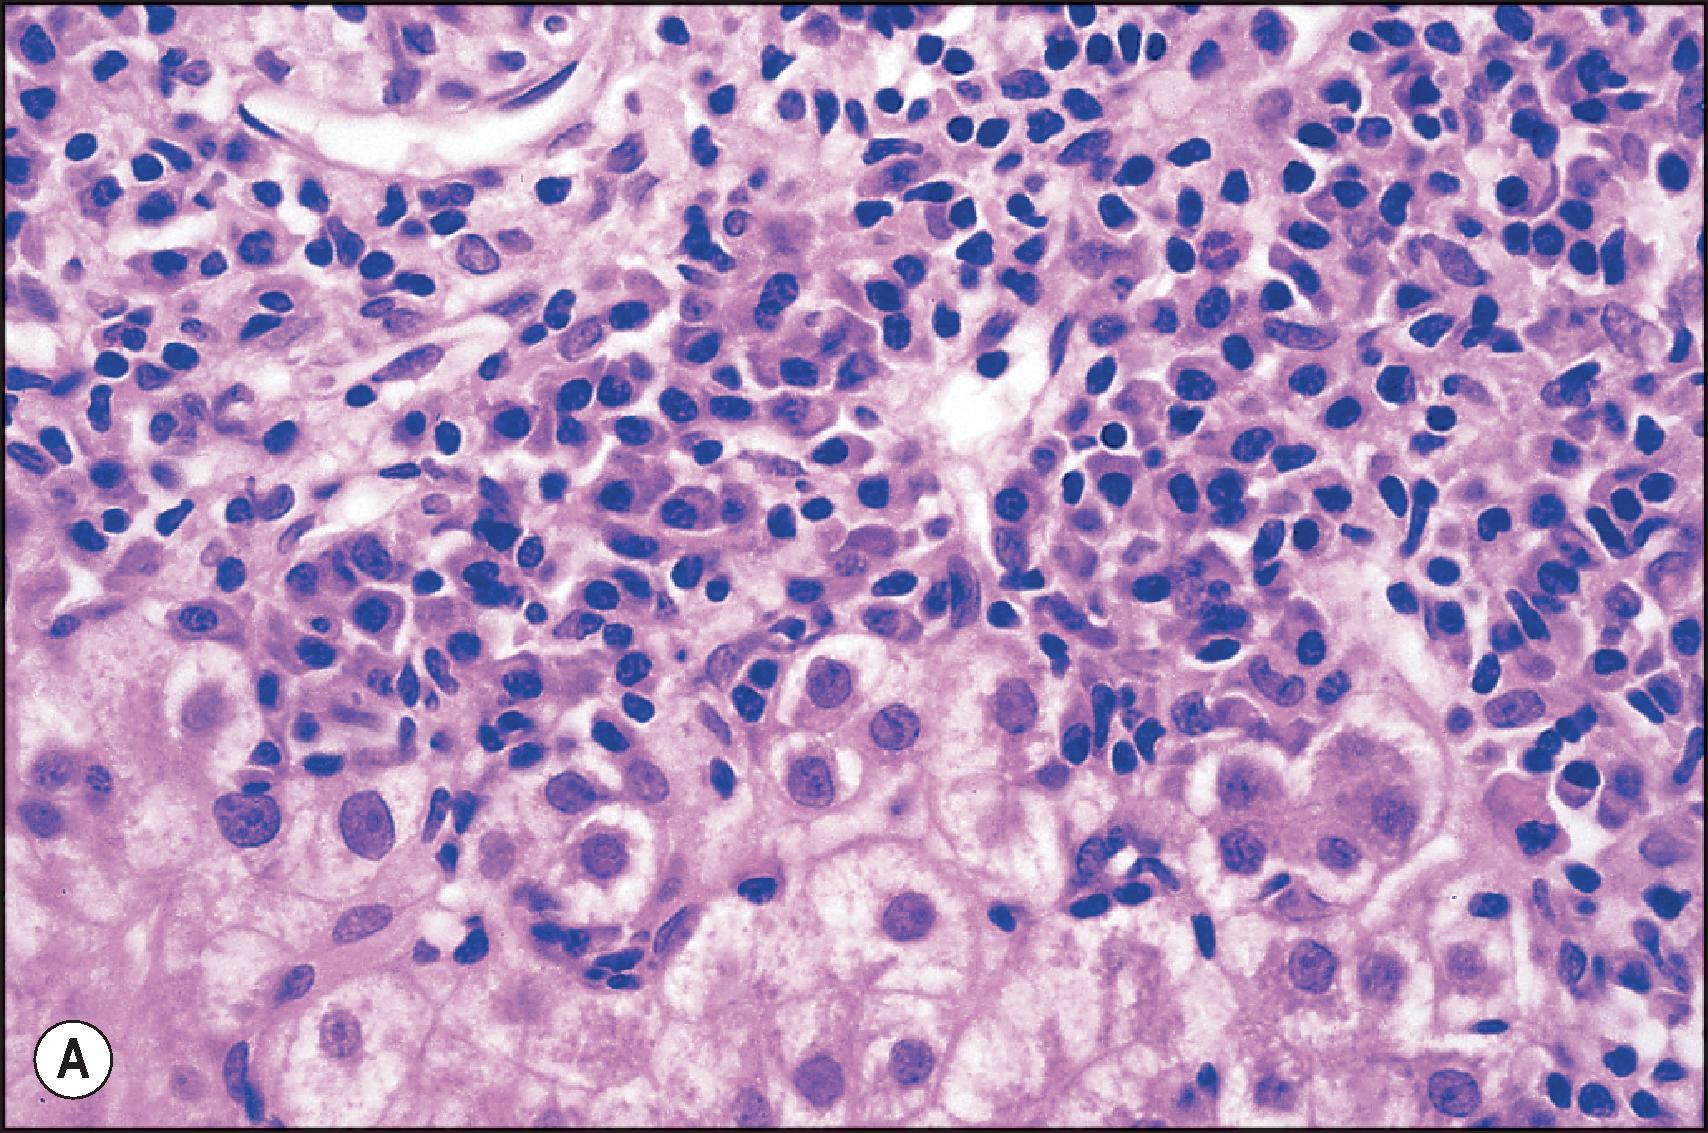 Figure 14.9, Plasma cell-rich rejection. (A) Liver biopsy obtained 3.5 years after transplantation for primary sclerosing cholangitis and cholangiocarcinoma contains a dense plasma-cell rich portal inflammatory infiltrate associated with interface hepatitis. Serum anti-nuclear antibody (ANA) and anti-smooth muscle antibody (SMA) titres were 1:80 and 1:640, respectively. (H&E.) (B) In this biopsy obtained 7 months after transplantation for hepatitis B-related cirrhosis, there is a dense plasma cell-rich centrilobular inflammatory infiltrate associated with confluent/bridging necrosis. (H&E.)